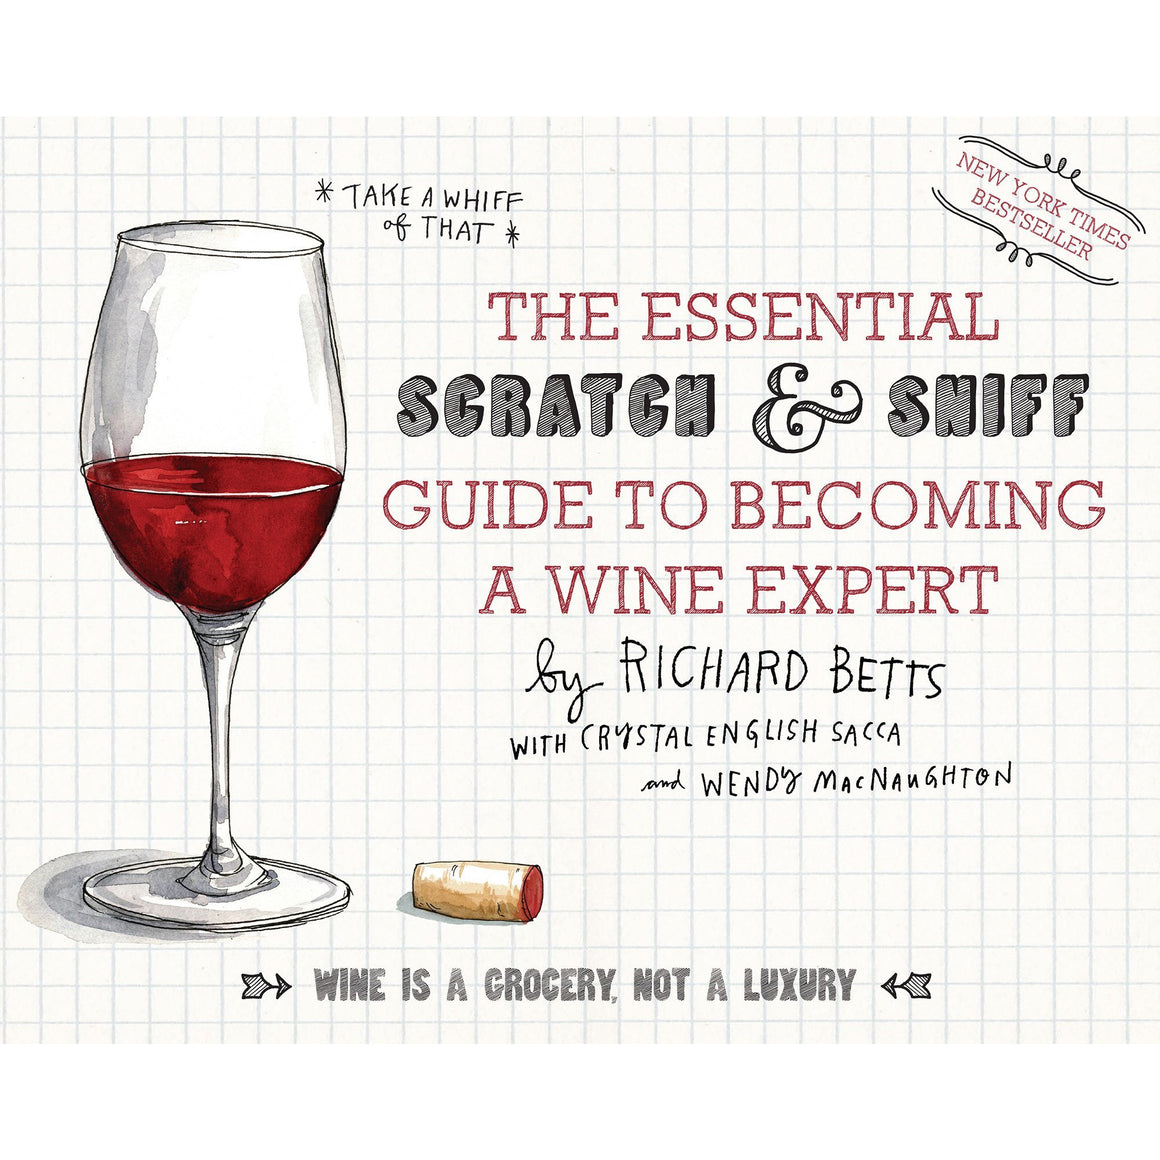 The Essential Scratch & Sniff Guide to Becoming a Wine Expert: Take a Whiff of That